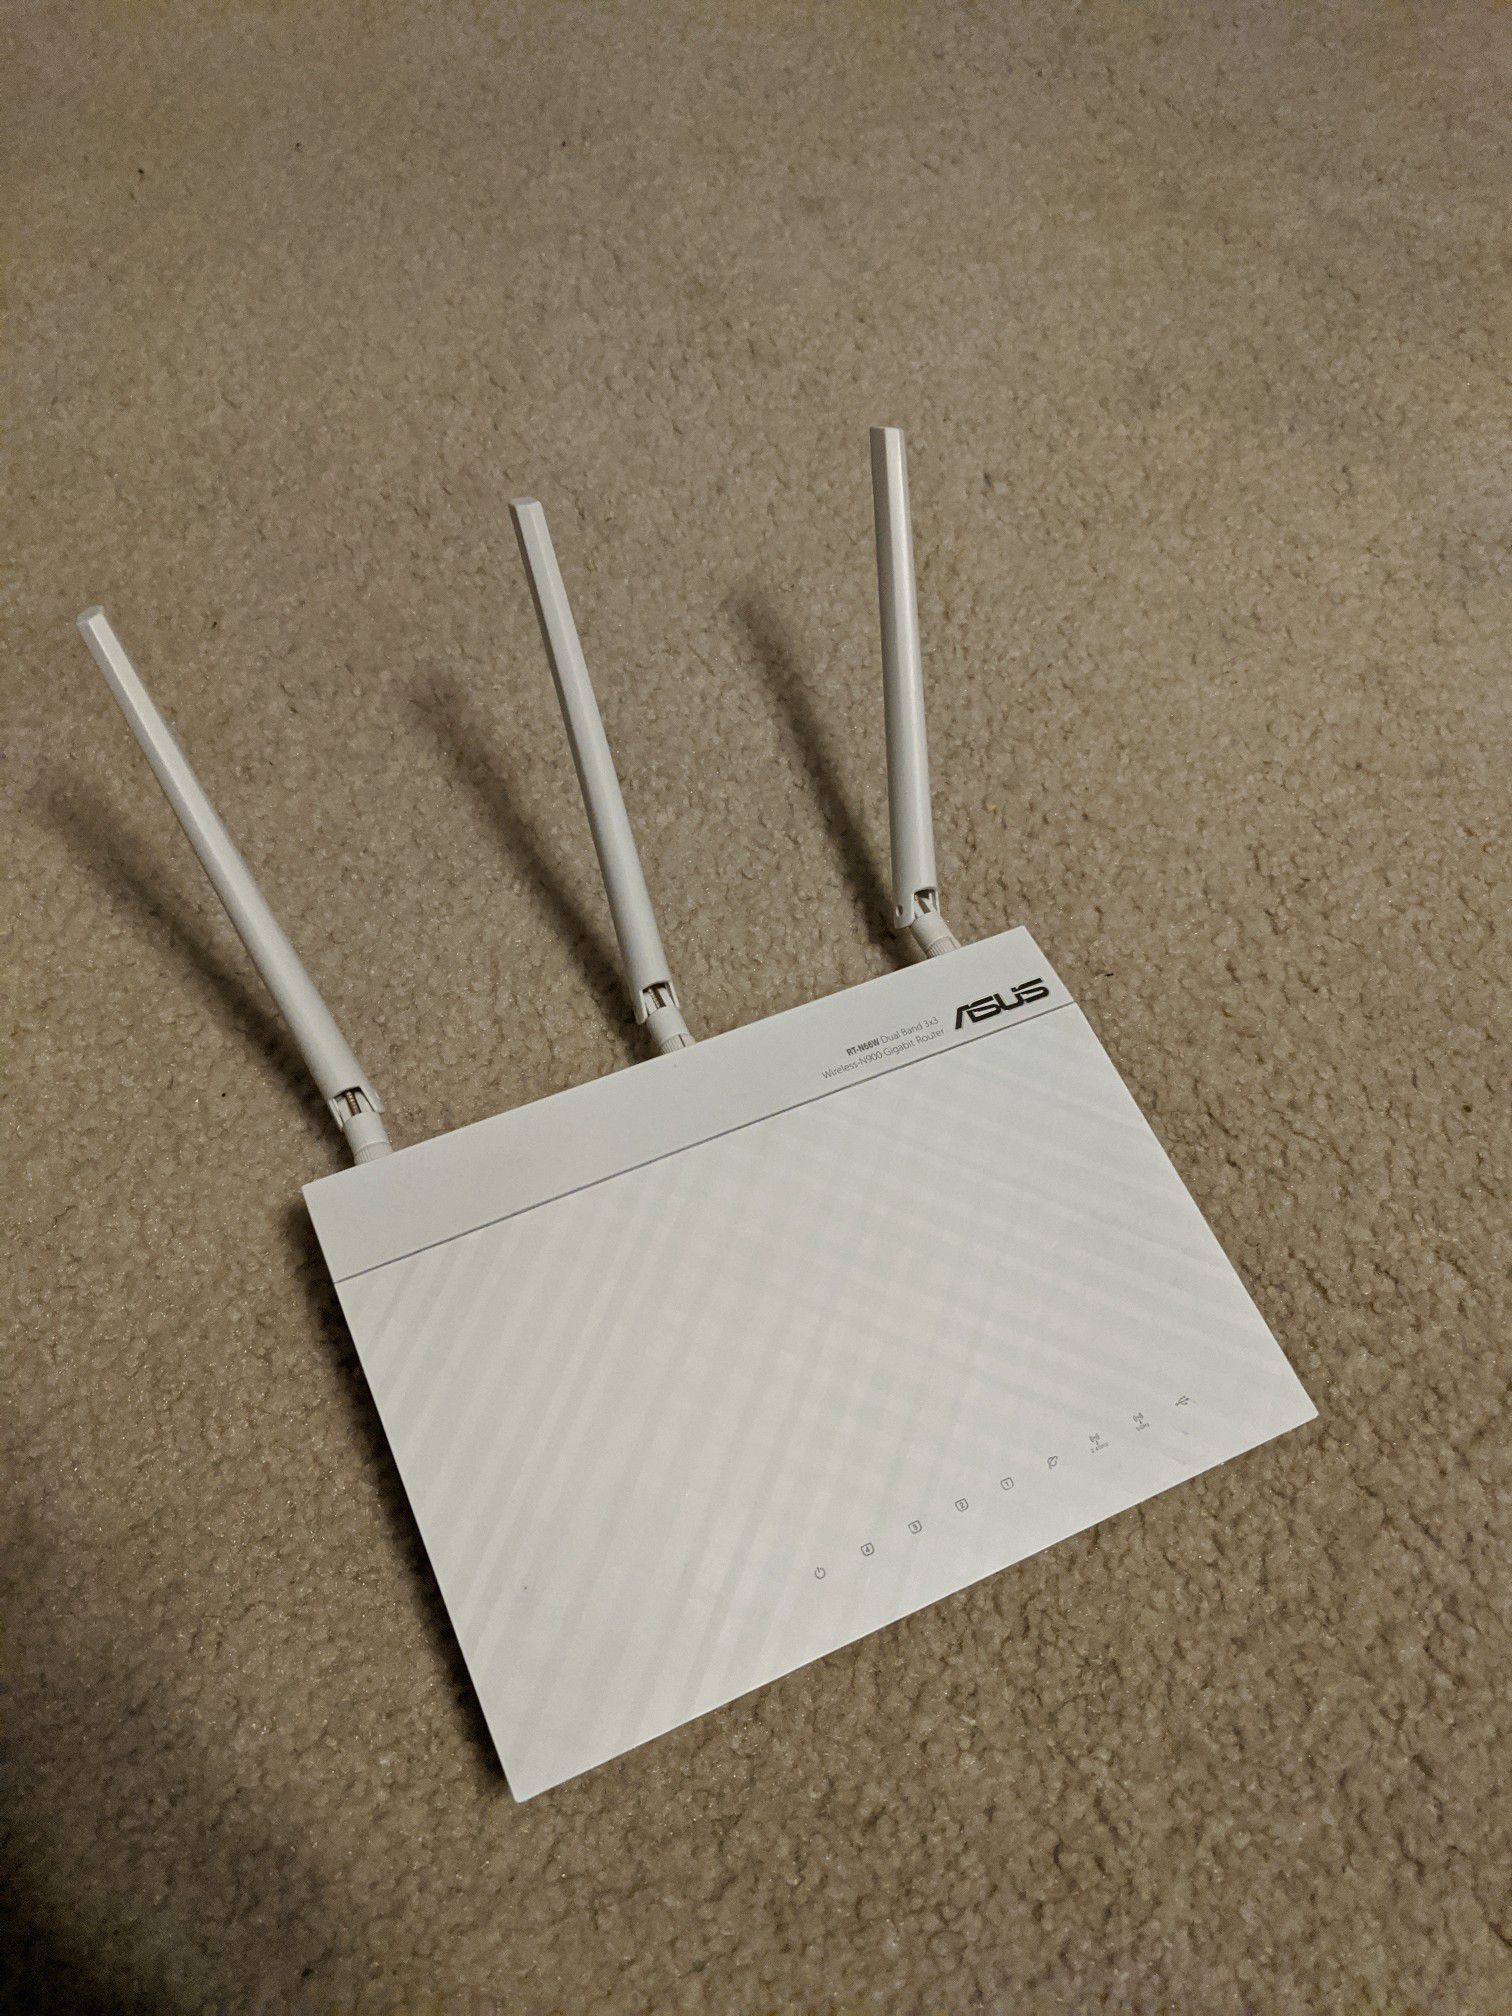 Asus 450 Mbps Router